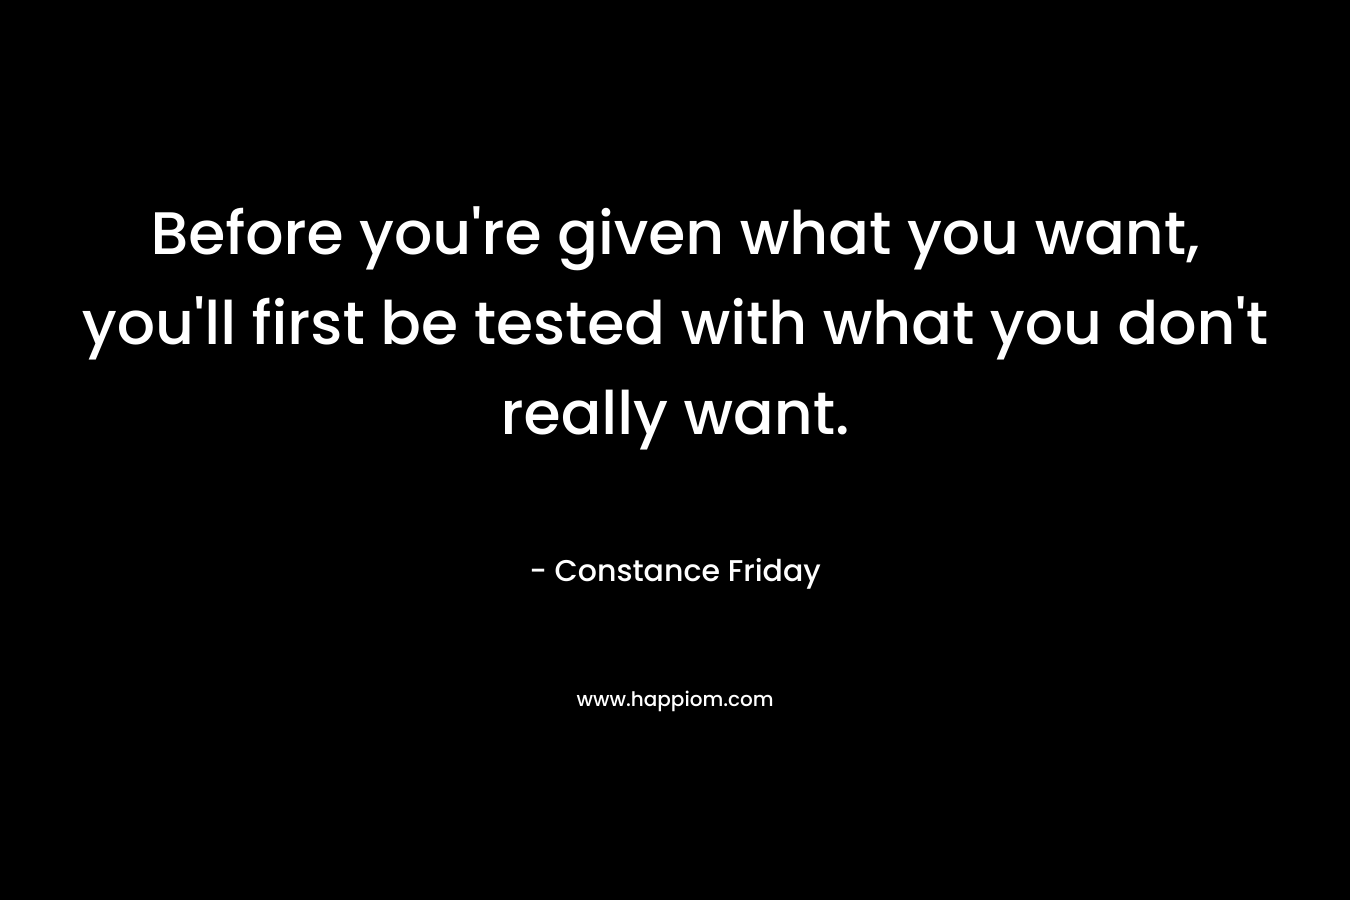 Before you're given what you want, you'll first be tested with what you don't really want.